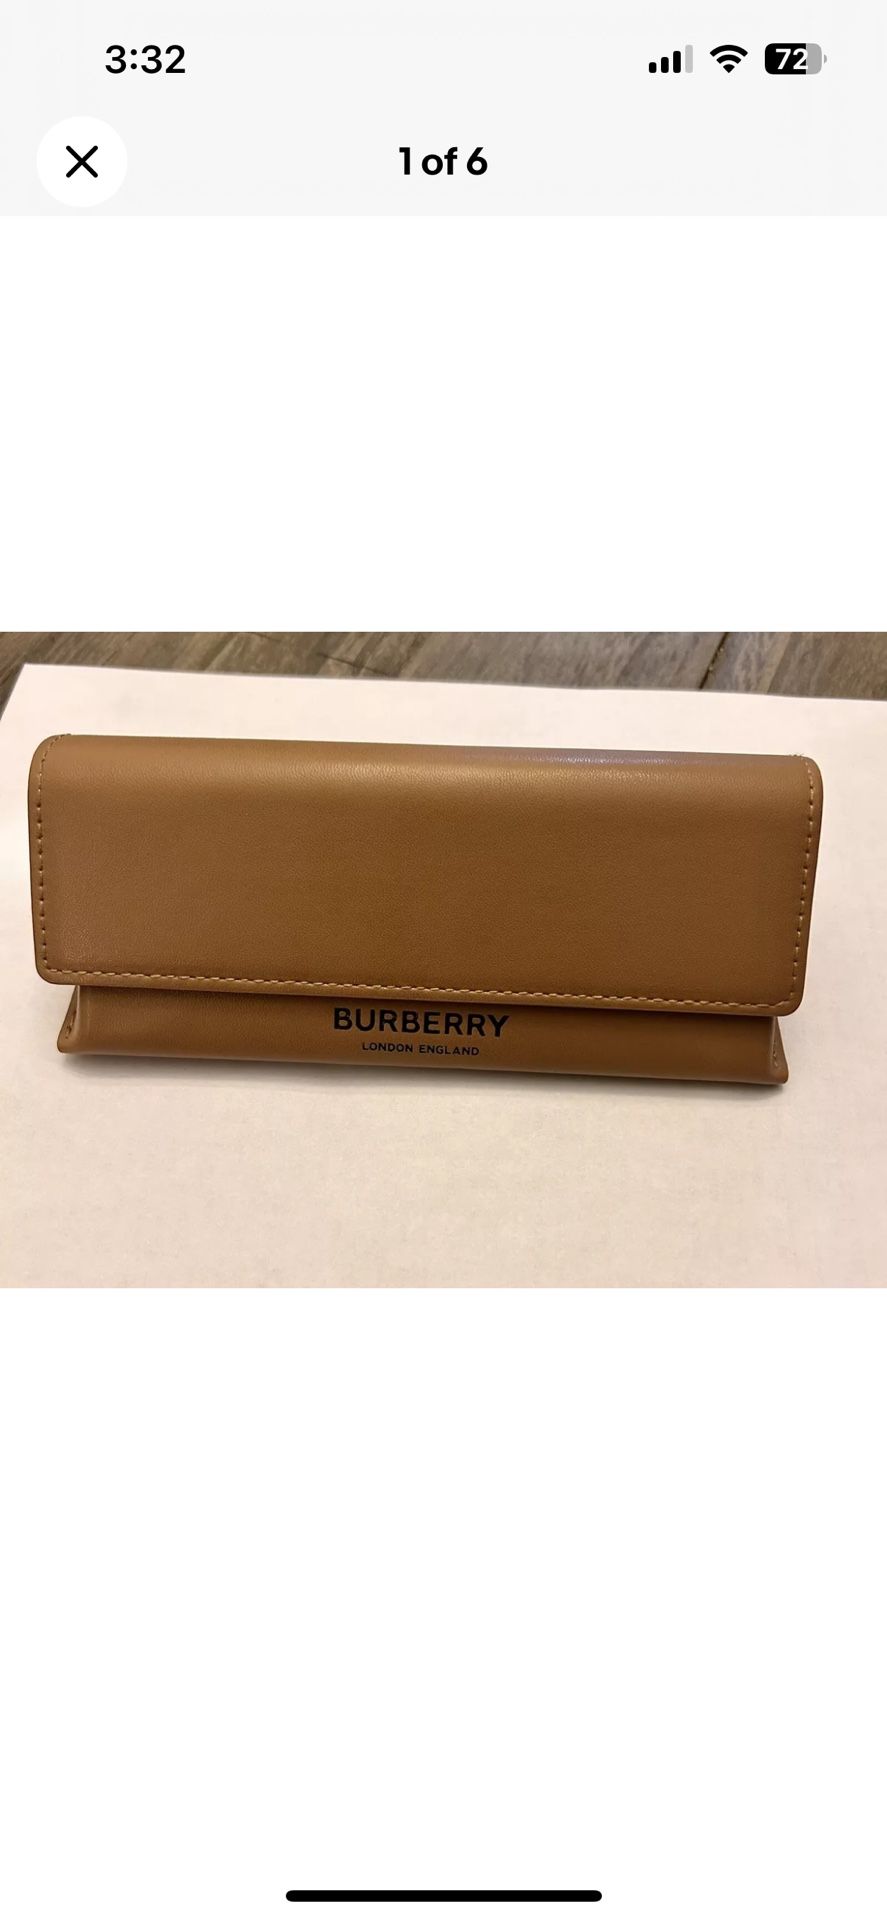 Burberry London England Leather Tan Sunglasses Magnetic Flap Cover Case